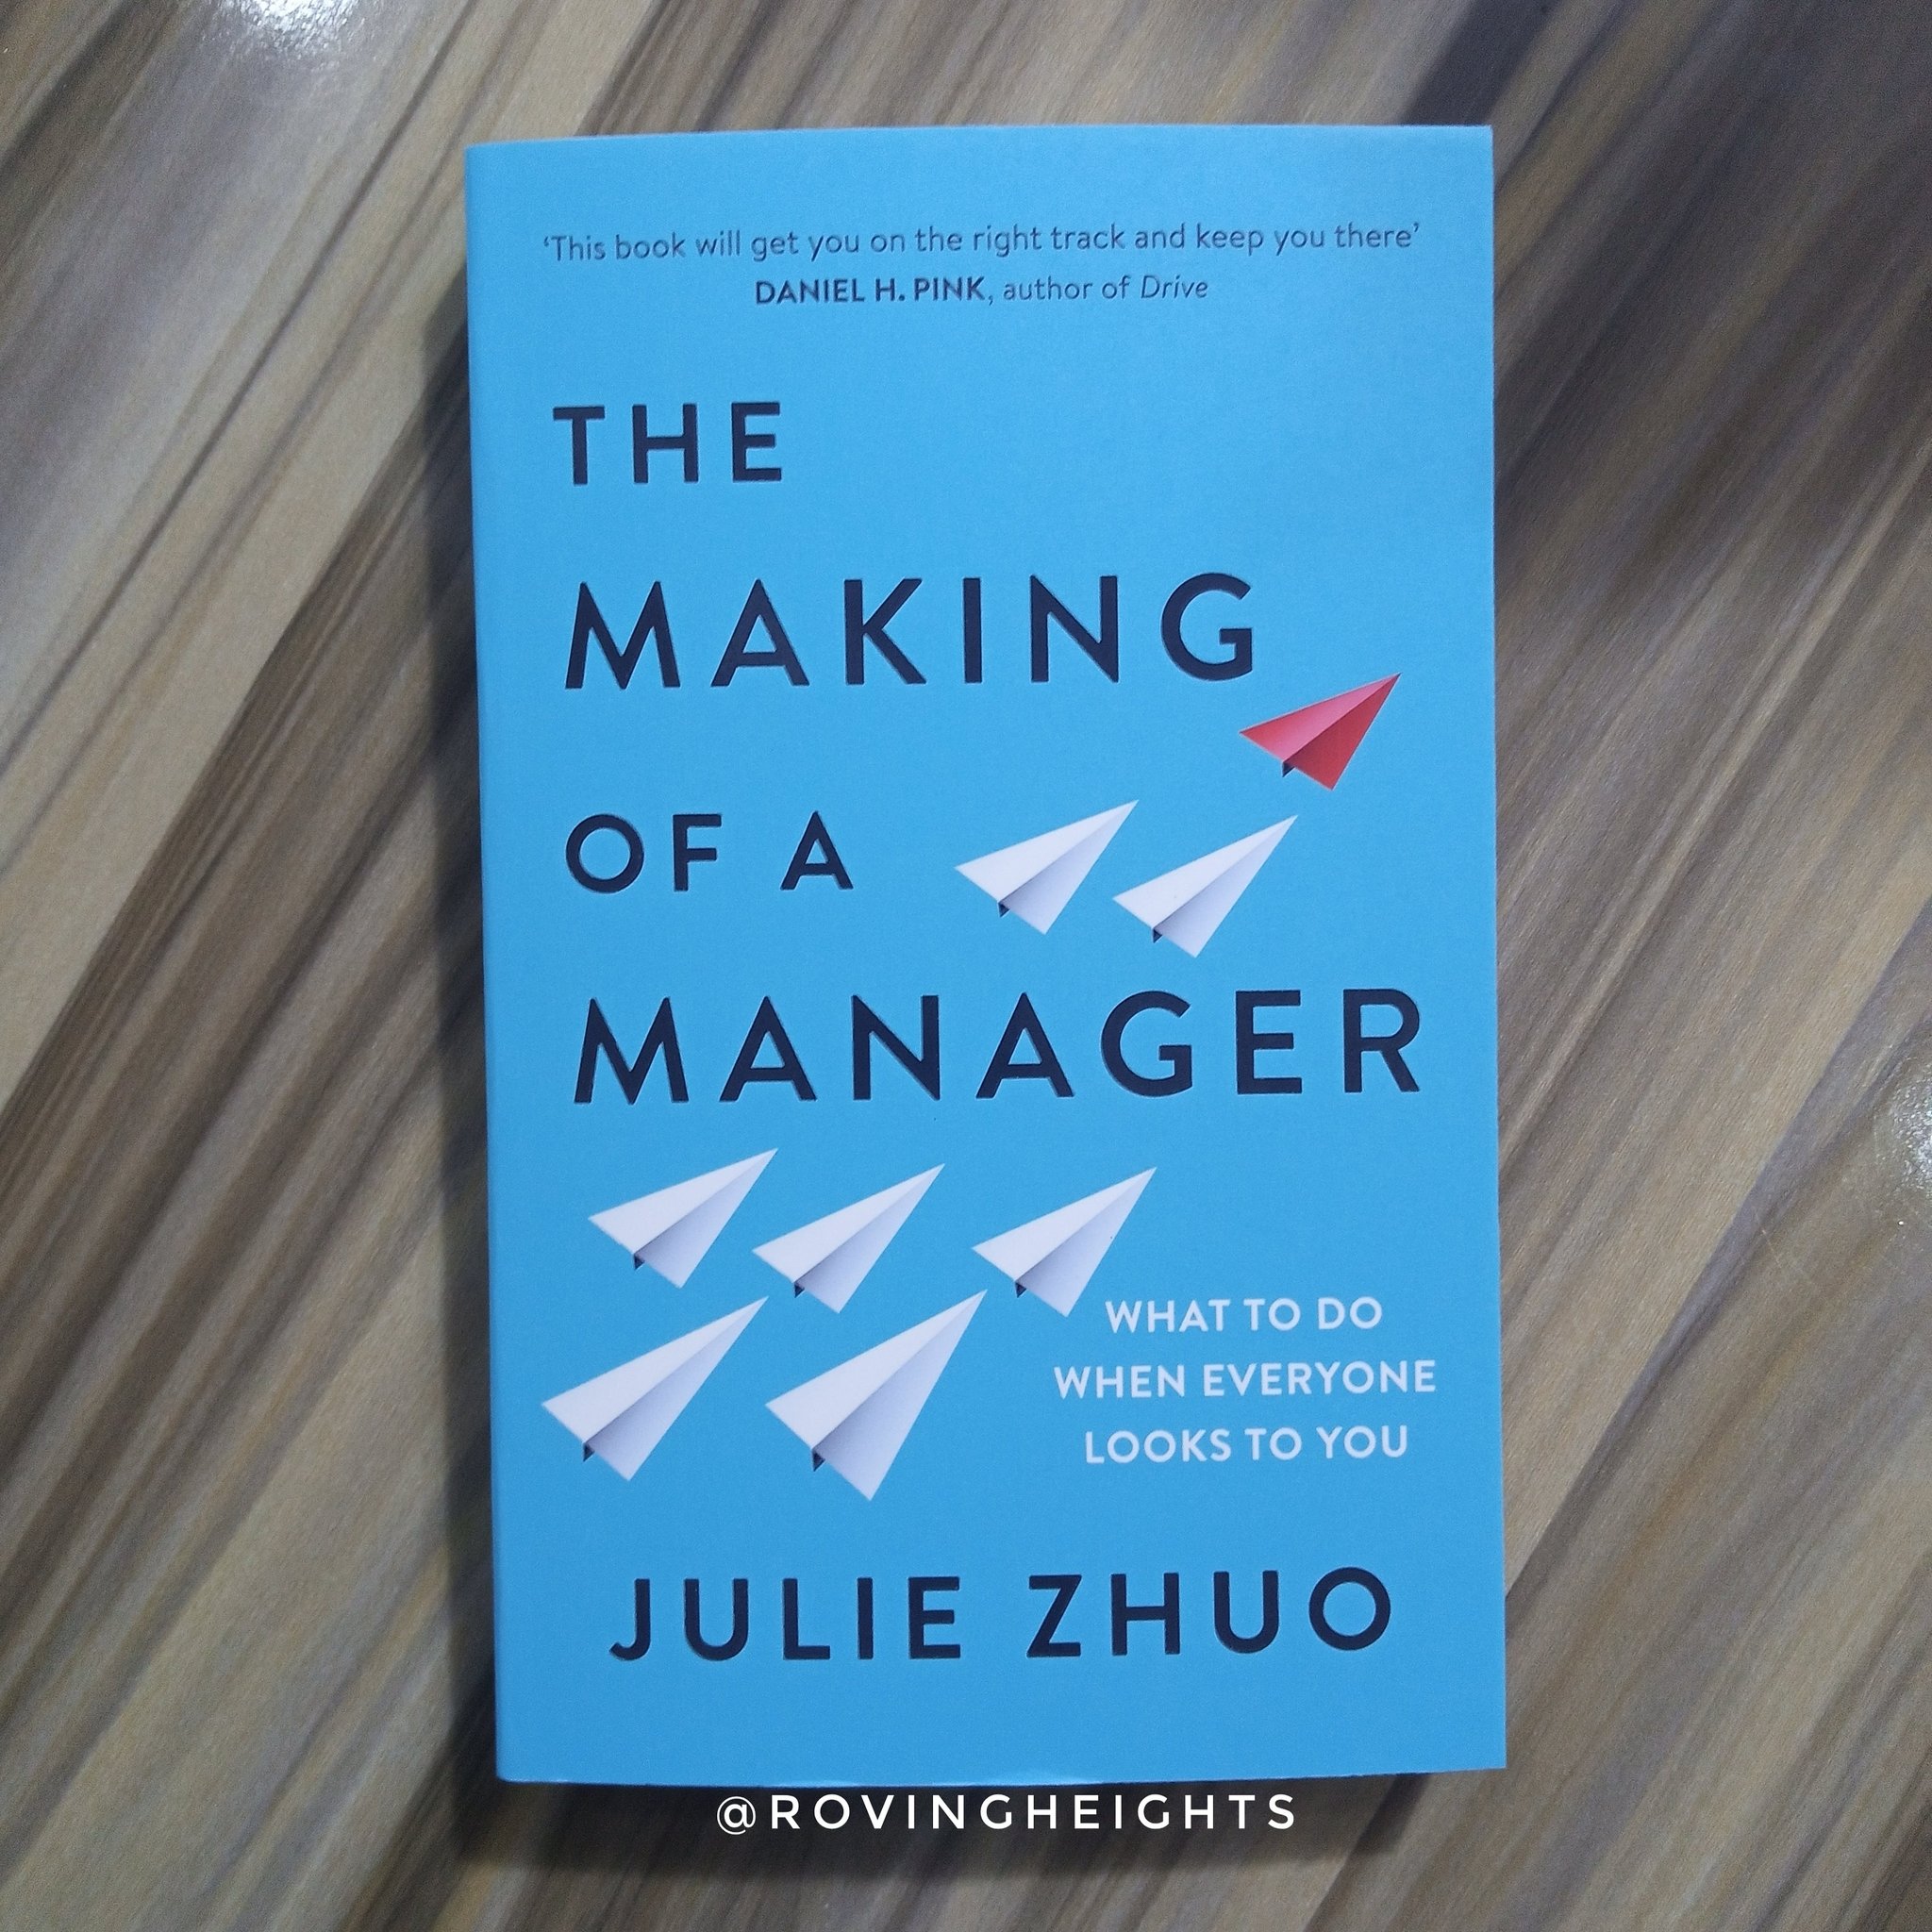 Rh Books The Making Of A Manager Makes You Know One Thing That Great Managers Are Made Not Born Whether You Re New To The Job A Veteran Leader Or Looking To